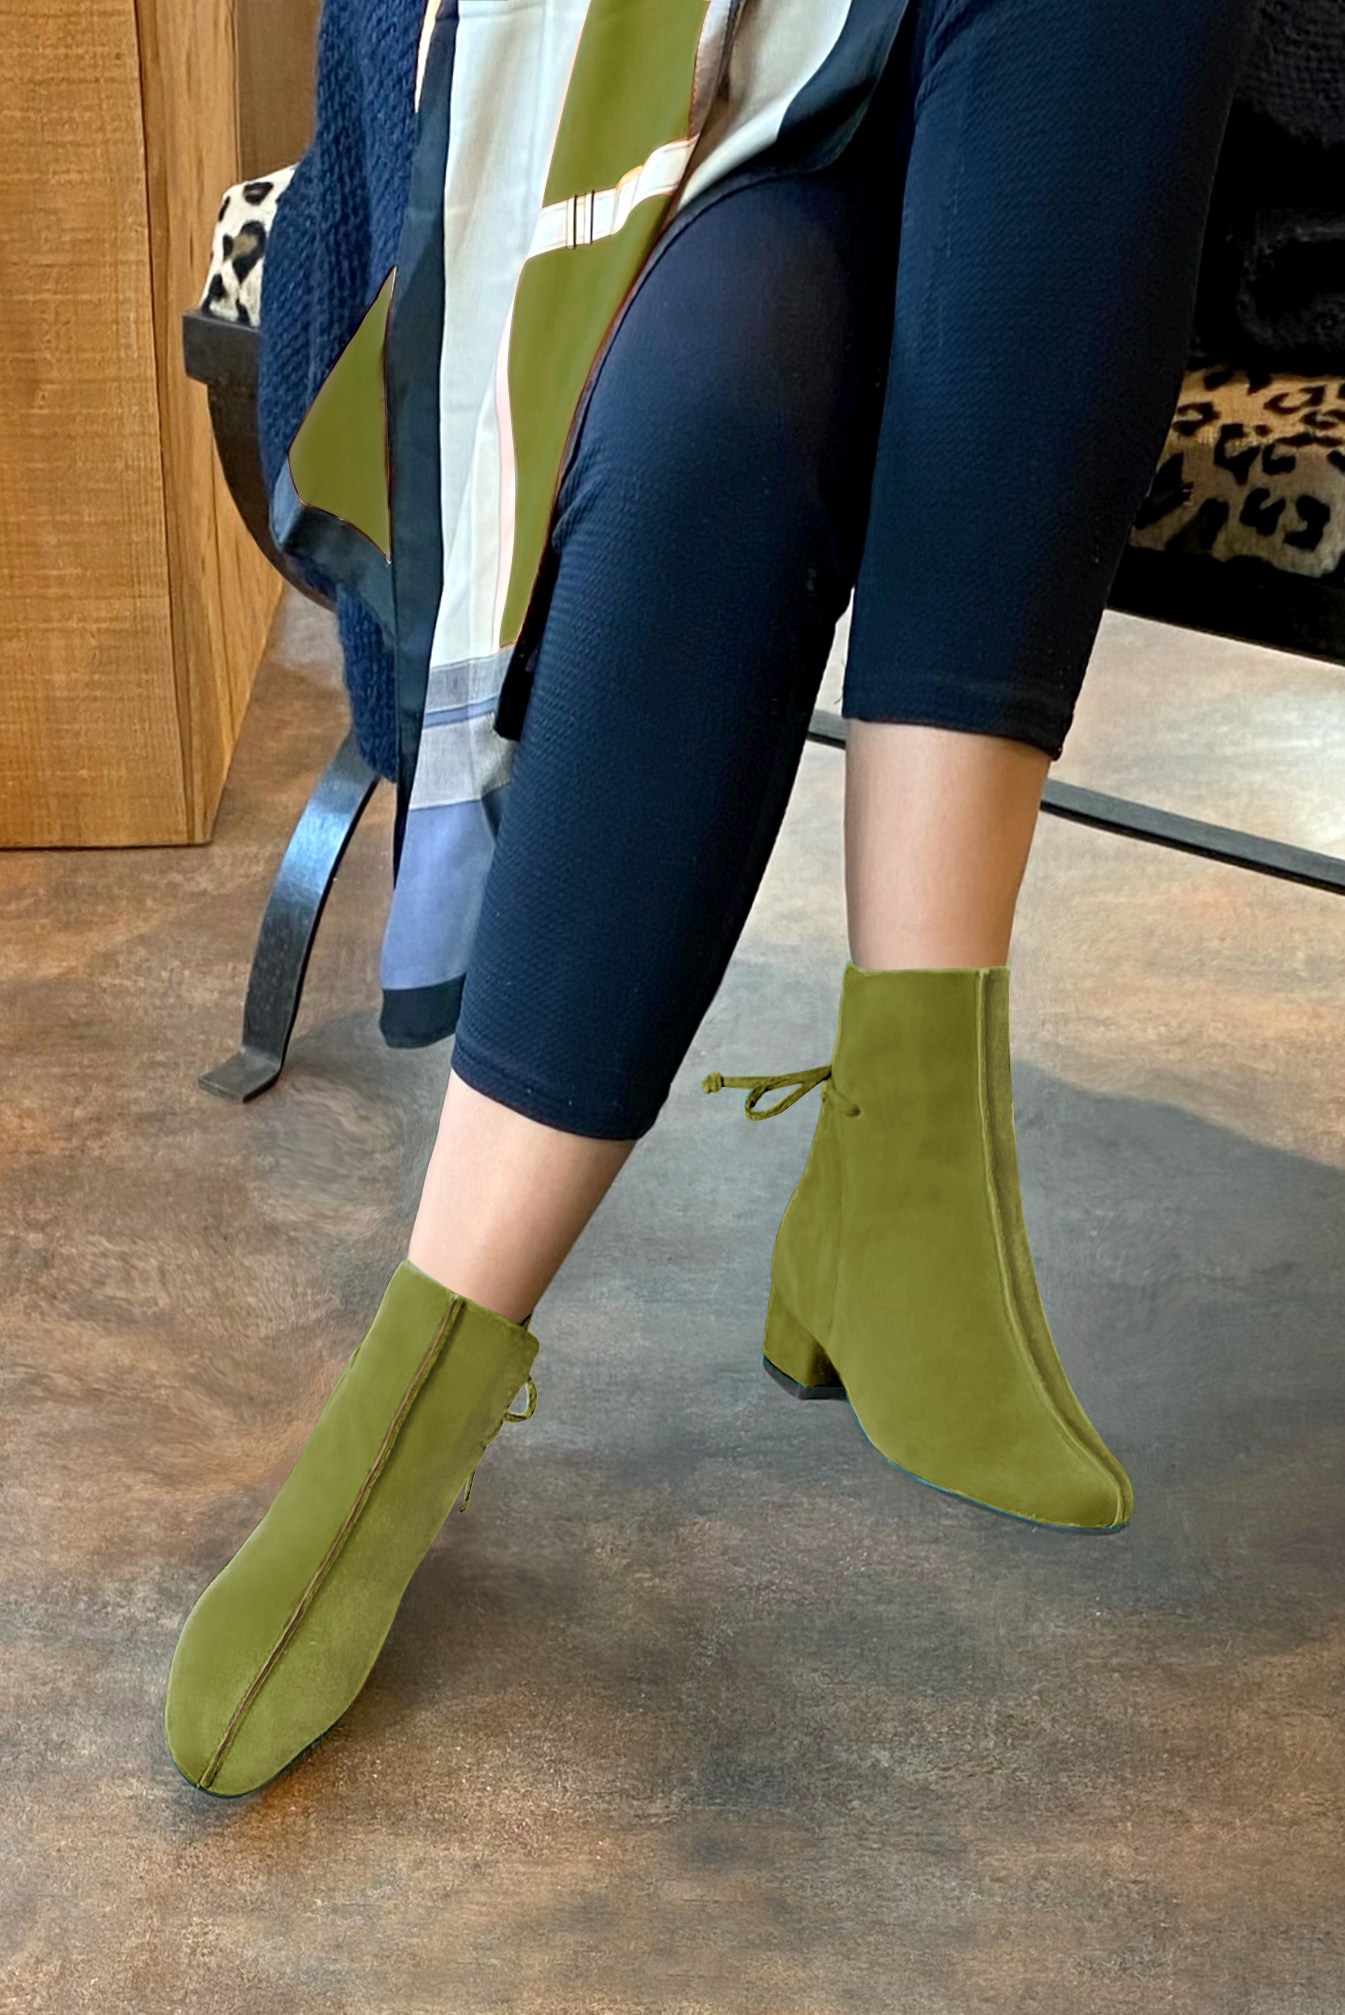 Pistachio green women's ankle boots with laces at the back. Round toe. Low block heels. Worn view - Florence KOOIJMAN